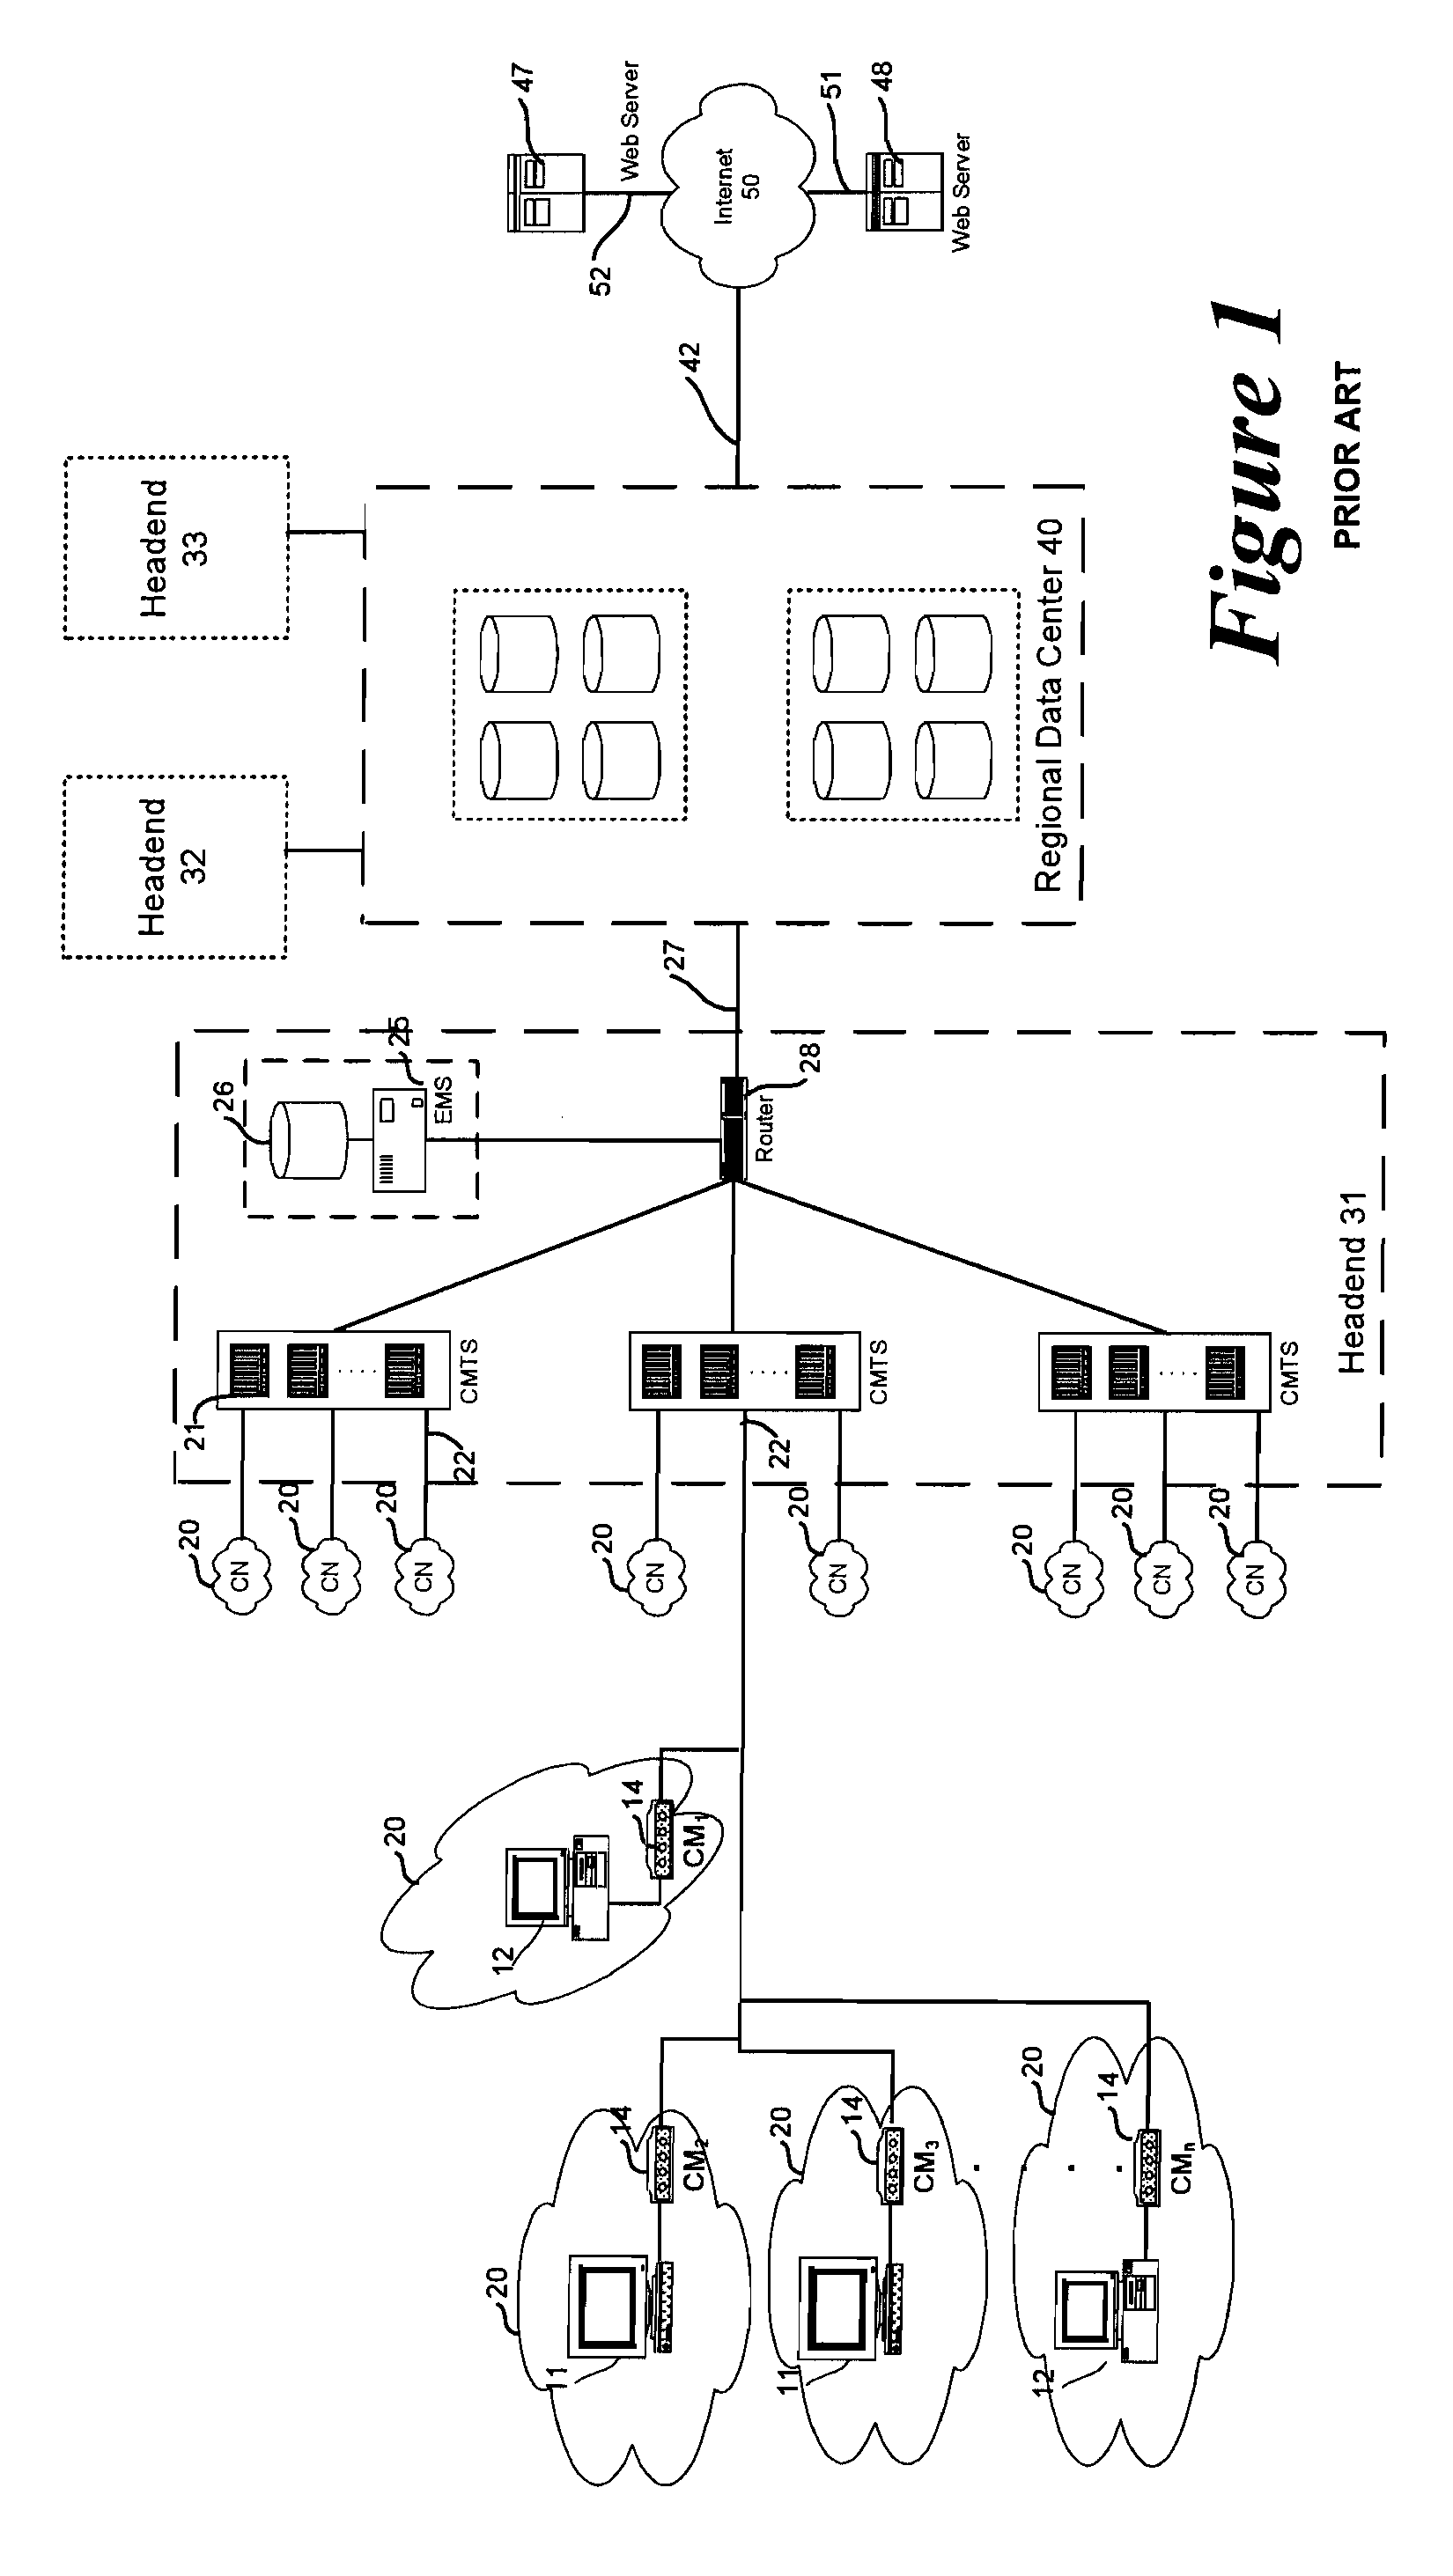 Method to block unauthorized network traffic in a cable data network